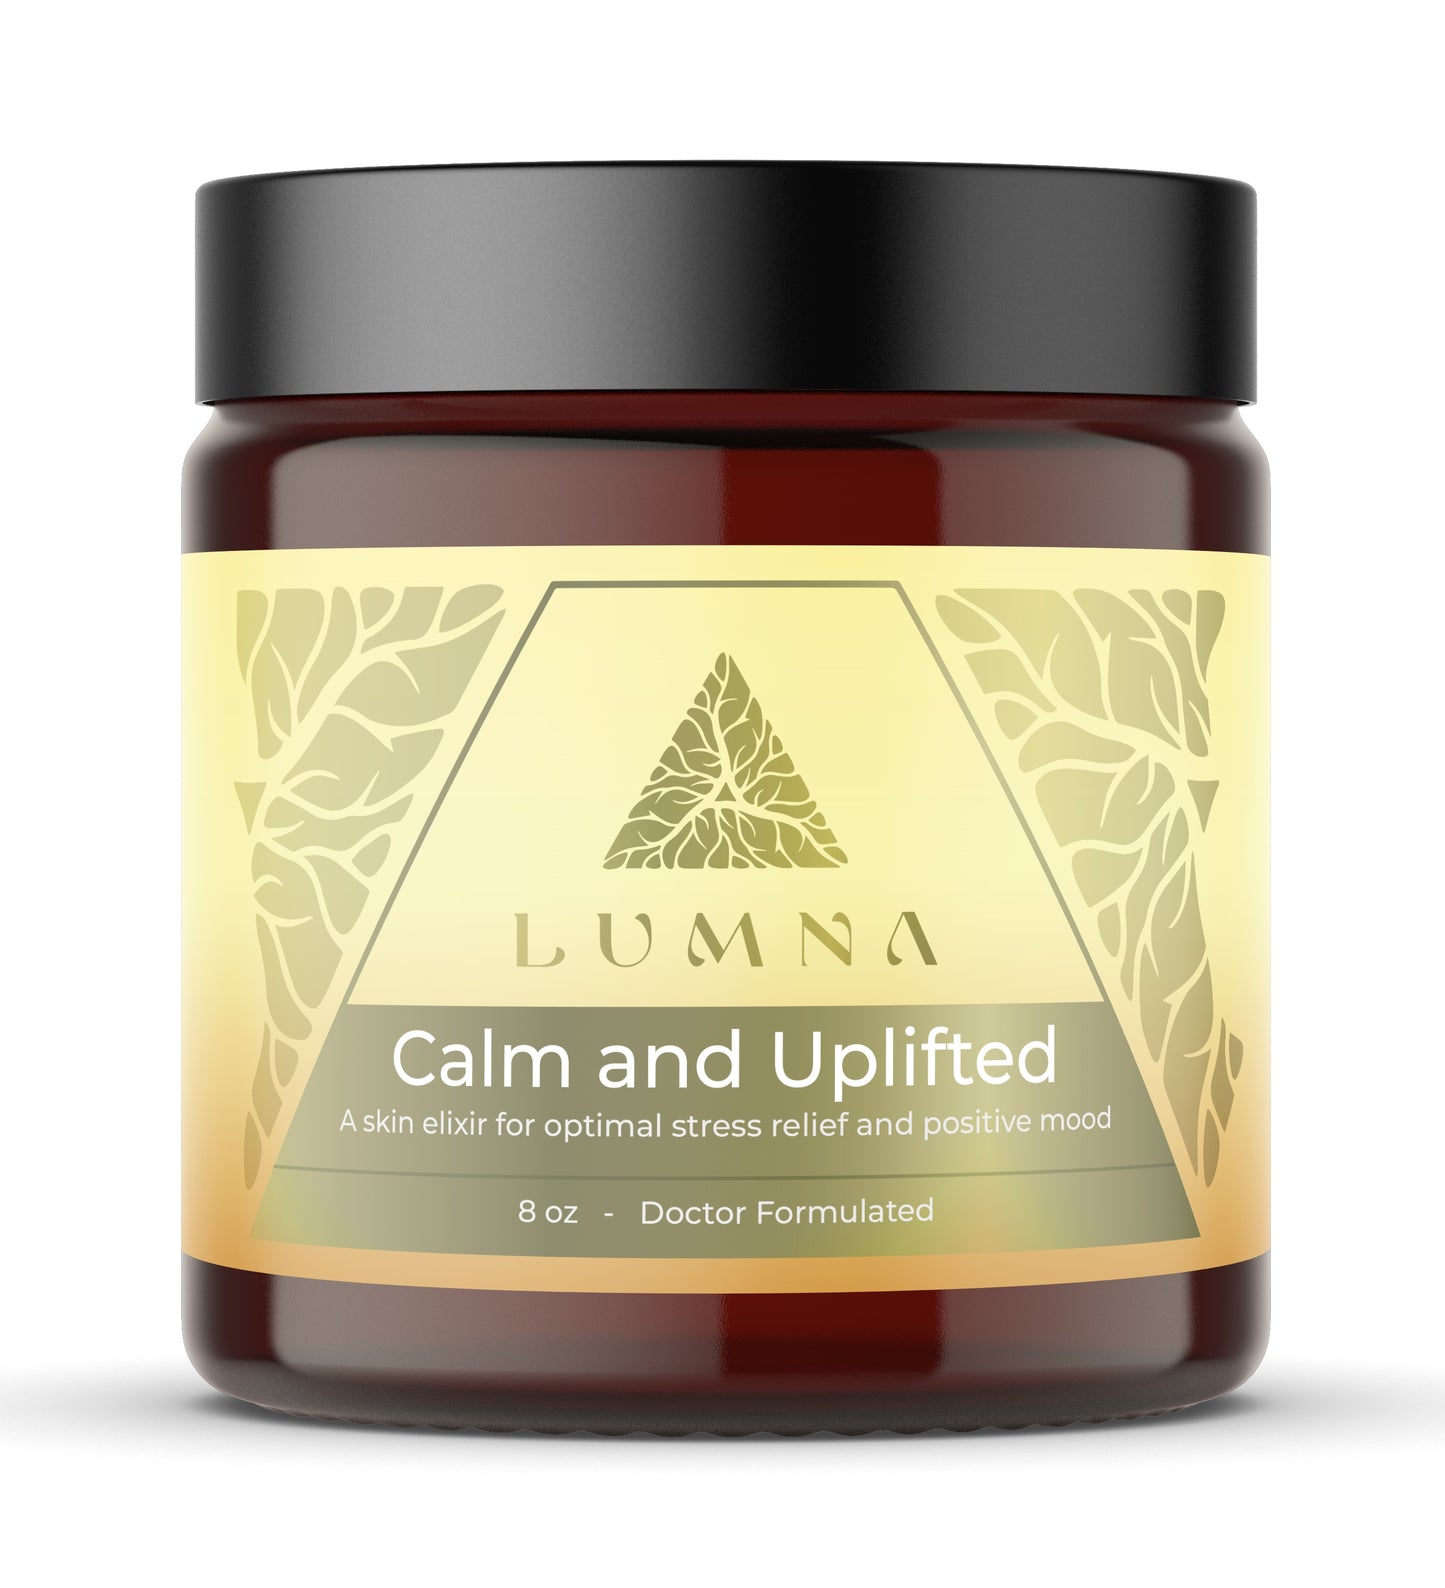 LUMNA Calm & Uplifted: A skin elixir for optimal stress relief and positive mood.